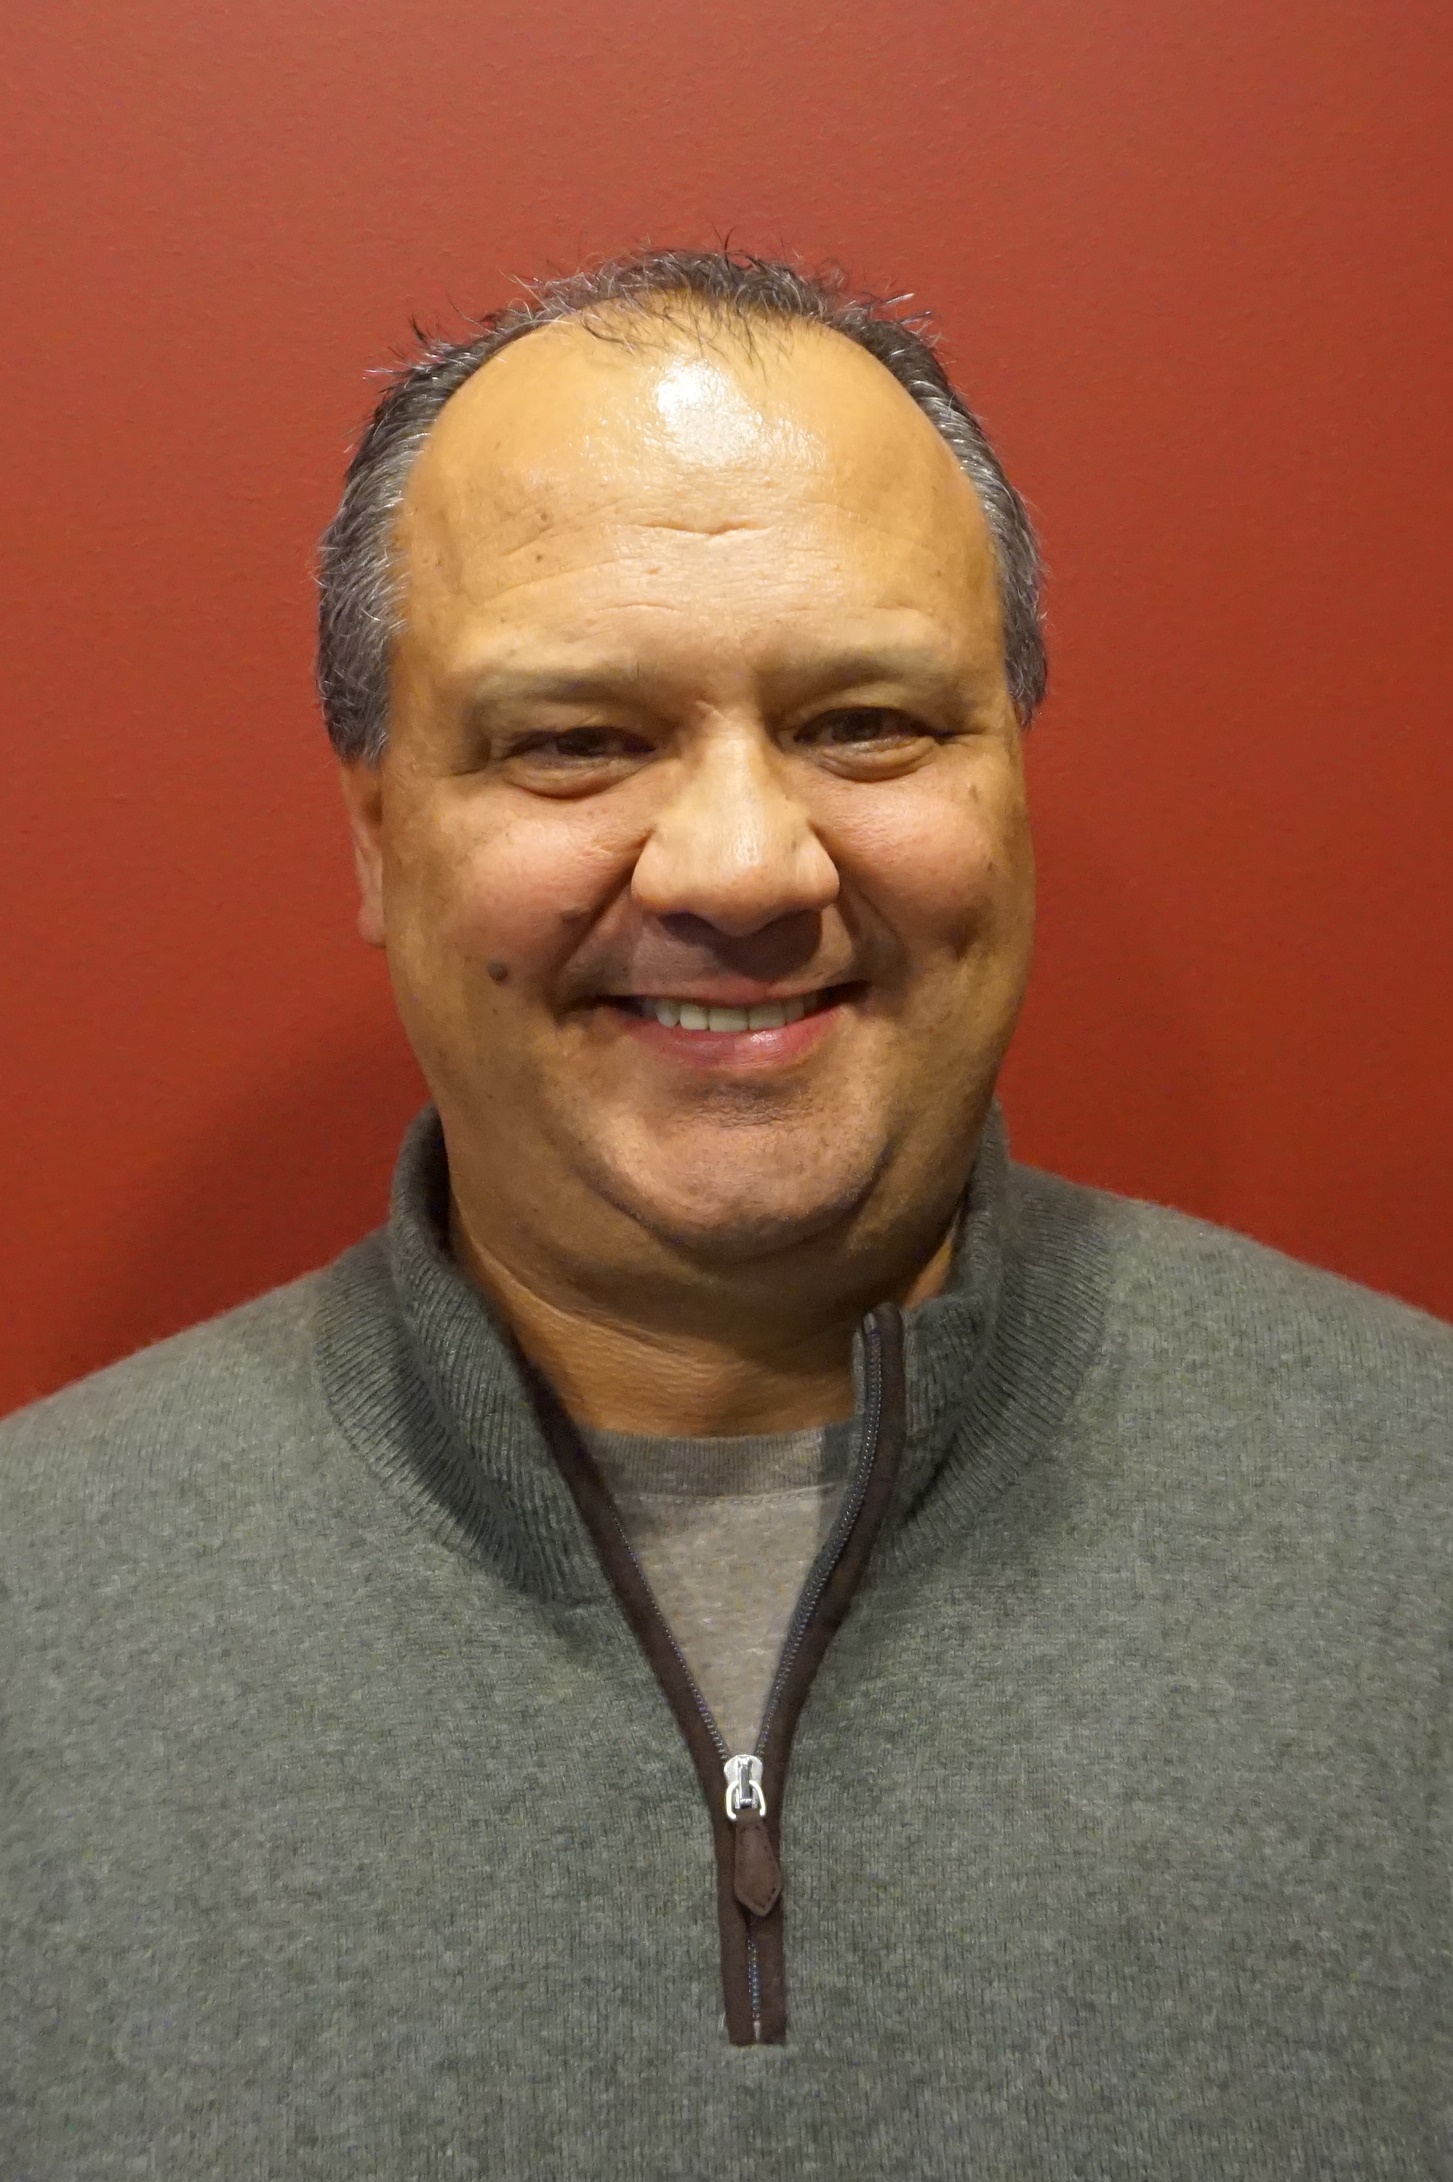 Al Audette, former owner of Teamwork Physical Therapy